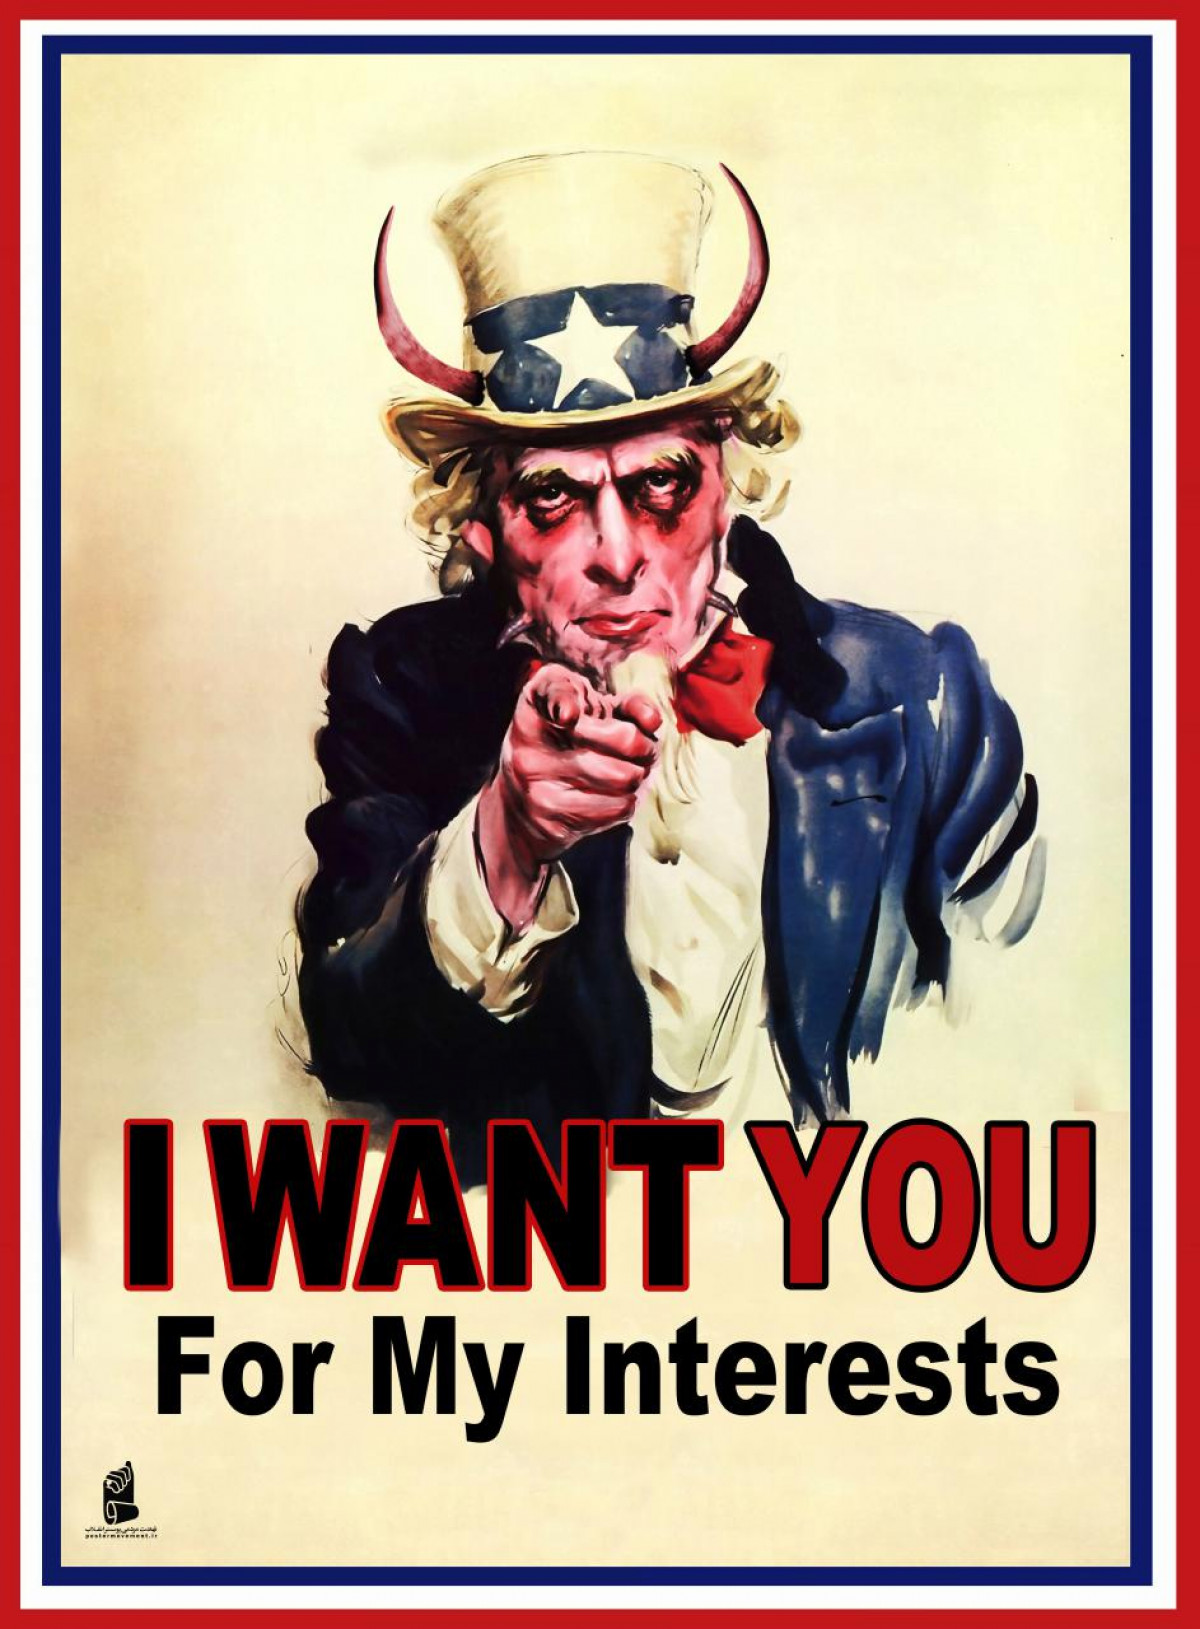 I want you for my interests